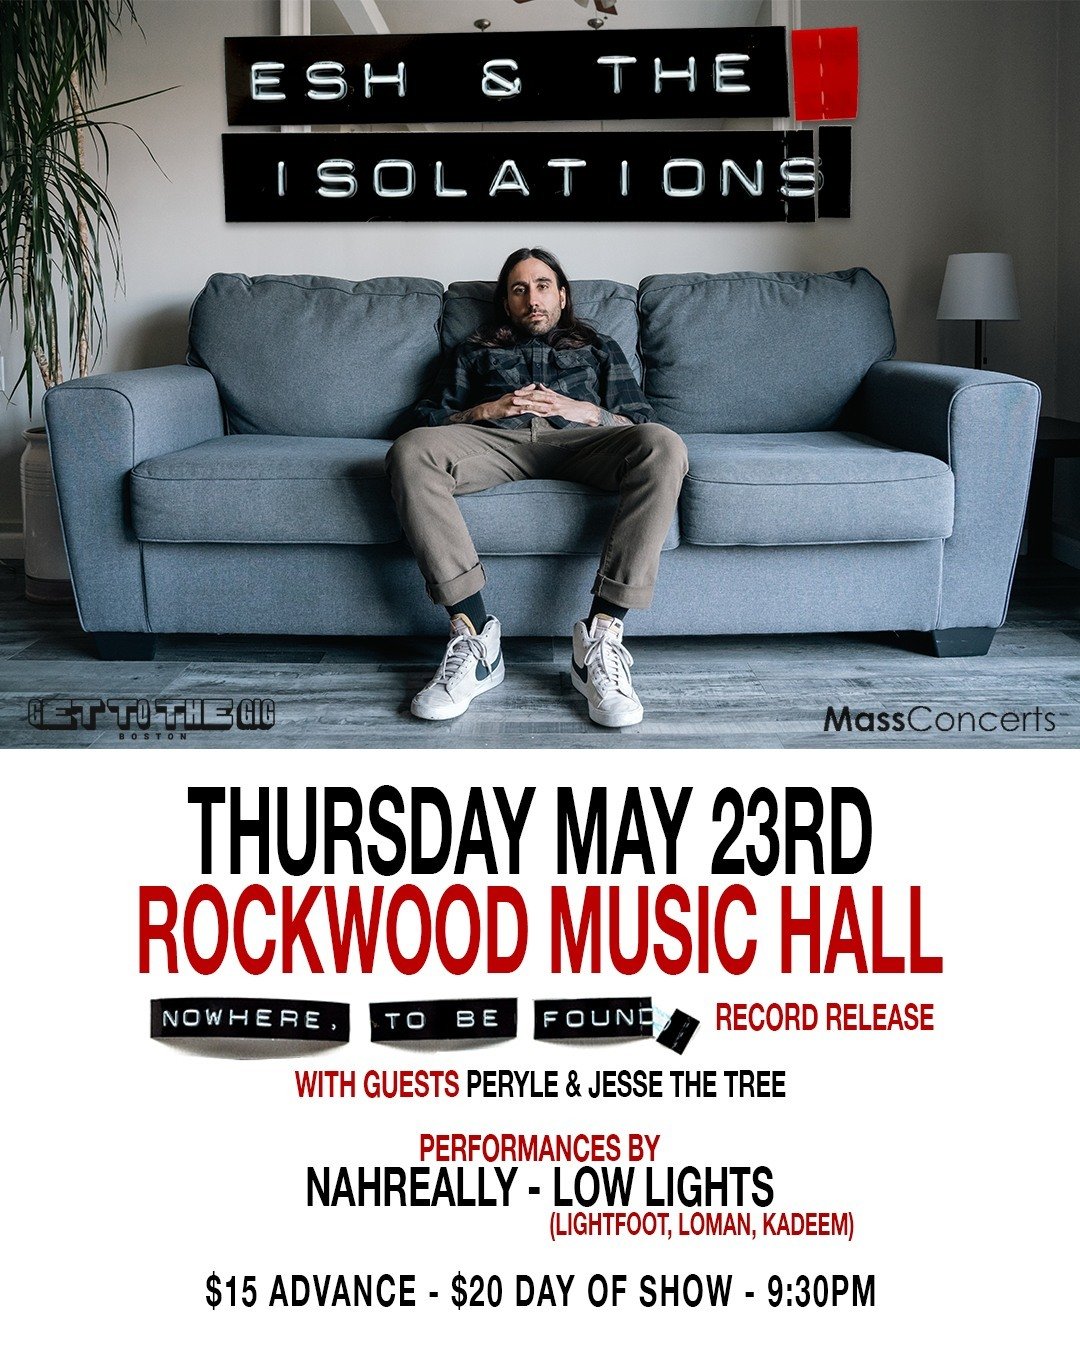 Esh &amp; The Isolations
with Perlyle &amp; Jesse The Tree

Performances by Nahreally - Low Lights

Thursday May 23
Tickets: rockwoodboston.com 

Presented by @get2thegigbos @massconcerts